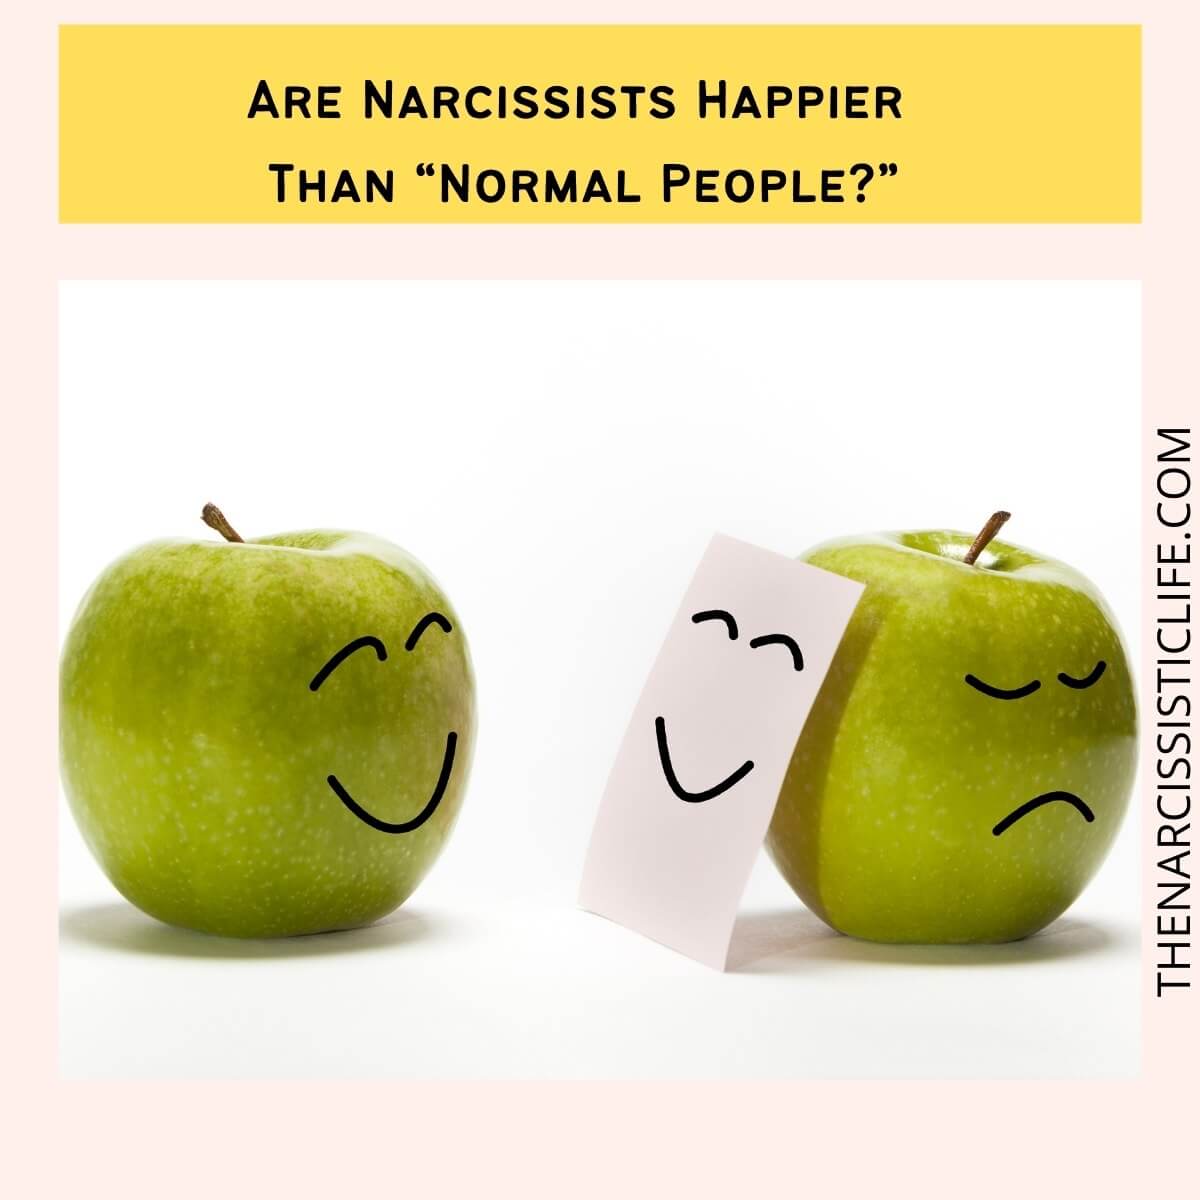 All Natural Numbers Are Either Happy or Sad. Some Are Narcissistic